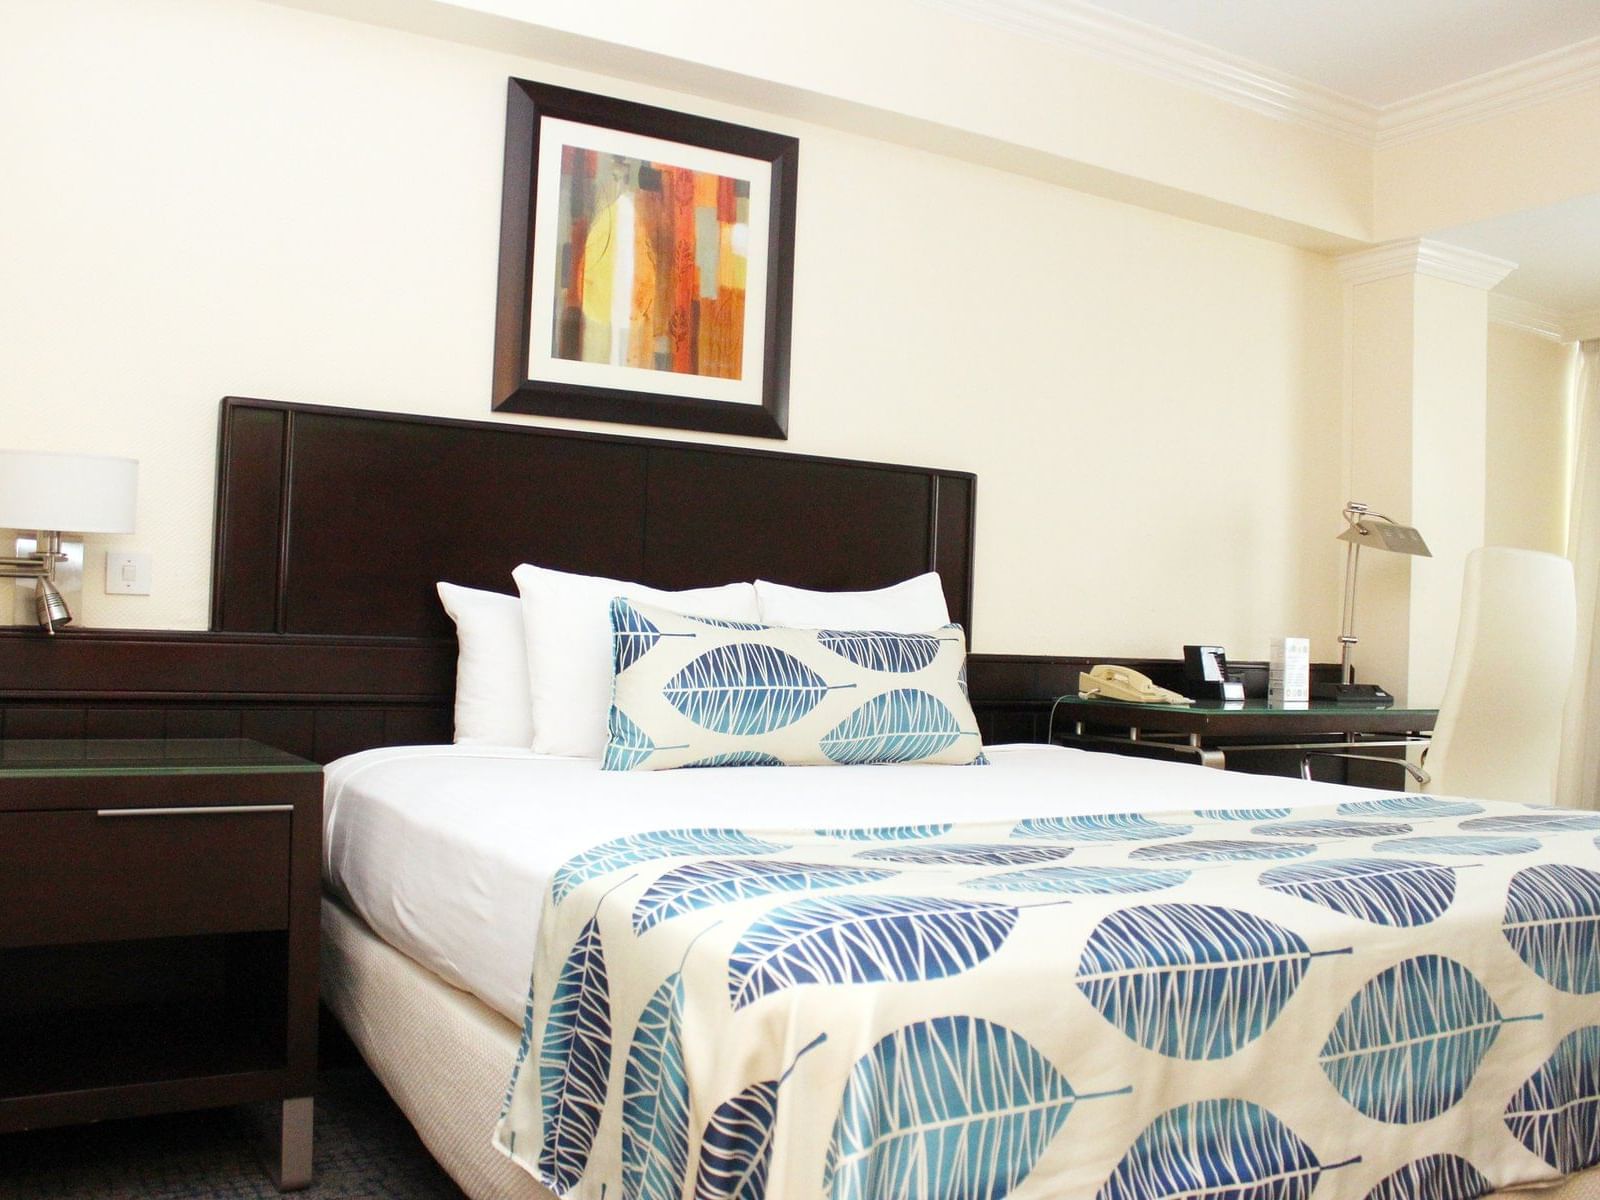 King bed & bedside table in Royal Deluxe Room at Jamaica Pegasus Hotel